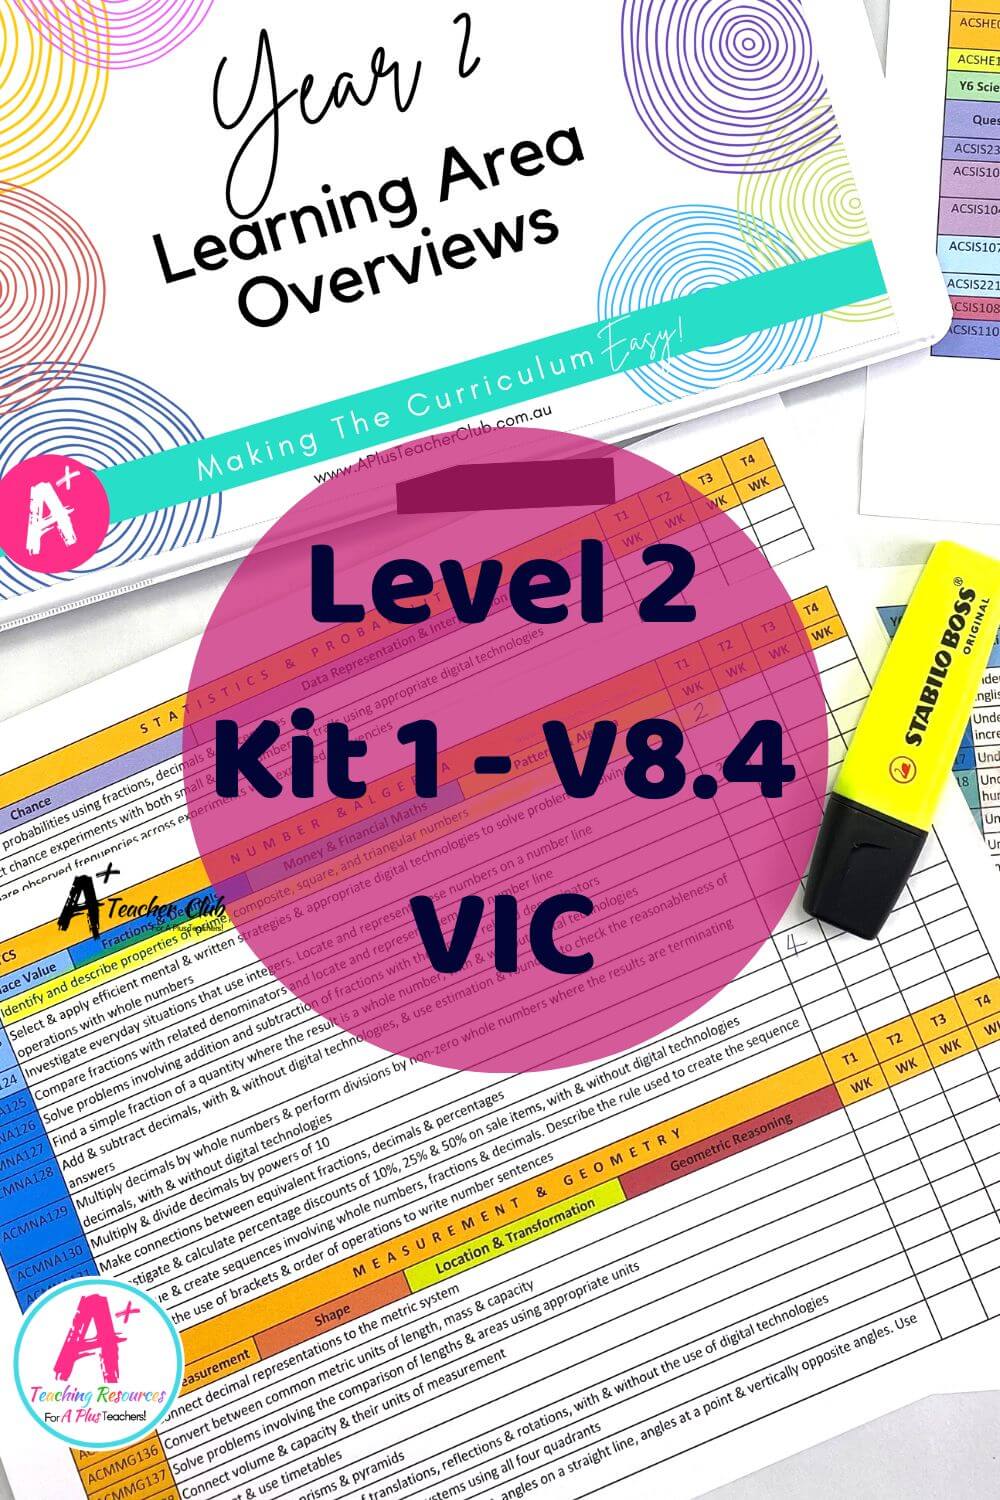 Level 2 Forward Planning Curriculum Overview VIC 8.4